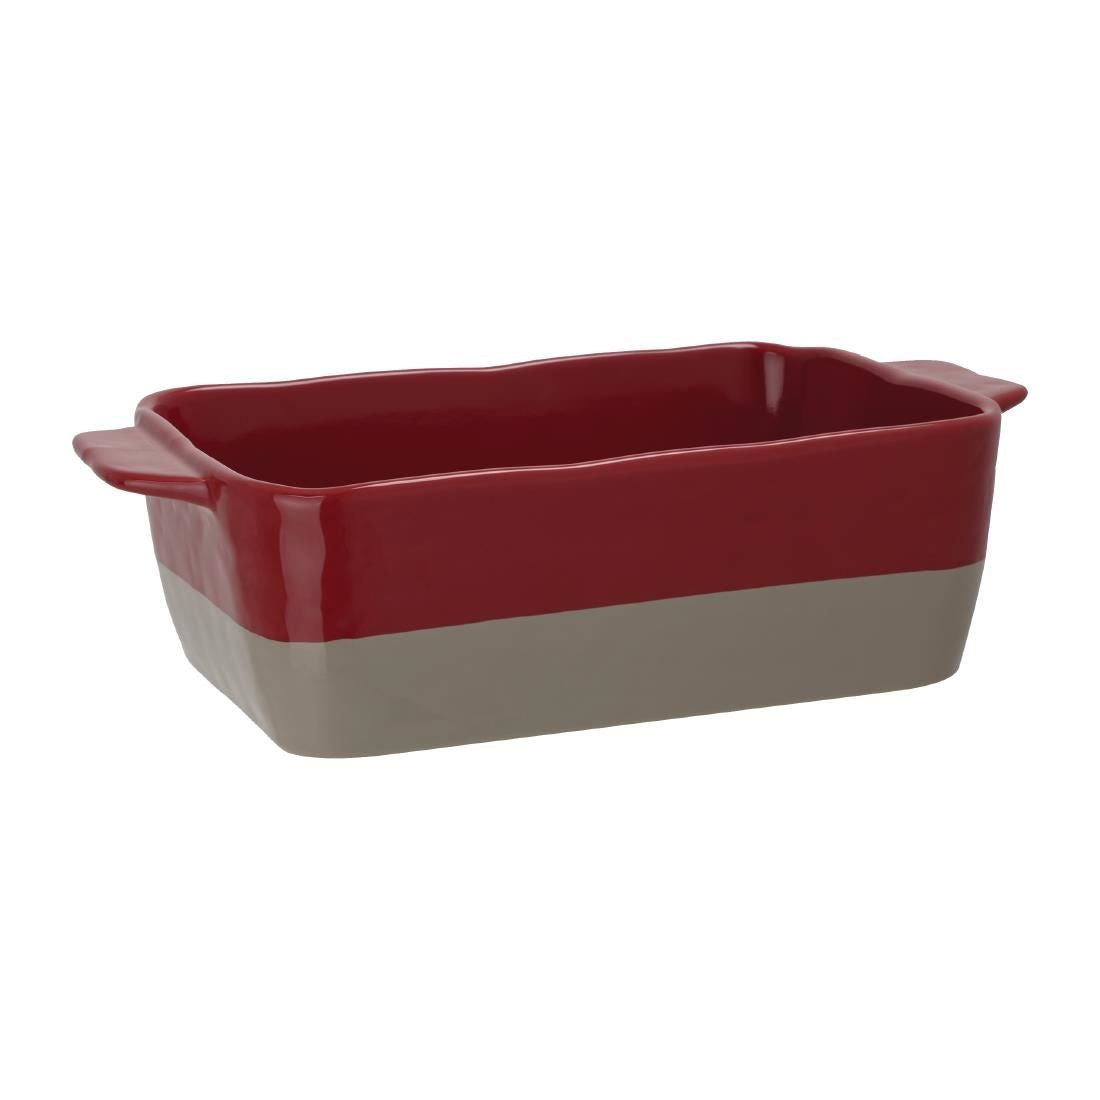 DB522 Olympia Red And Taupe Ceramic Roasting Dish JD Catering Equipment Solutions Ltd